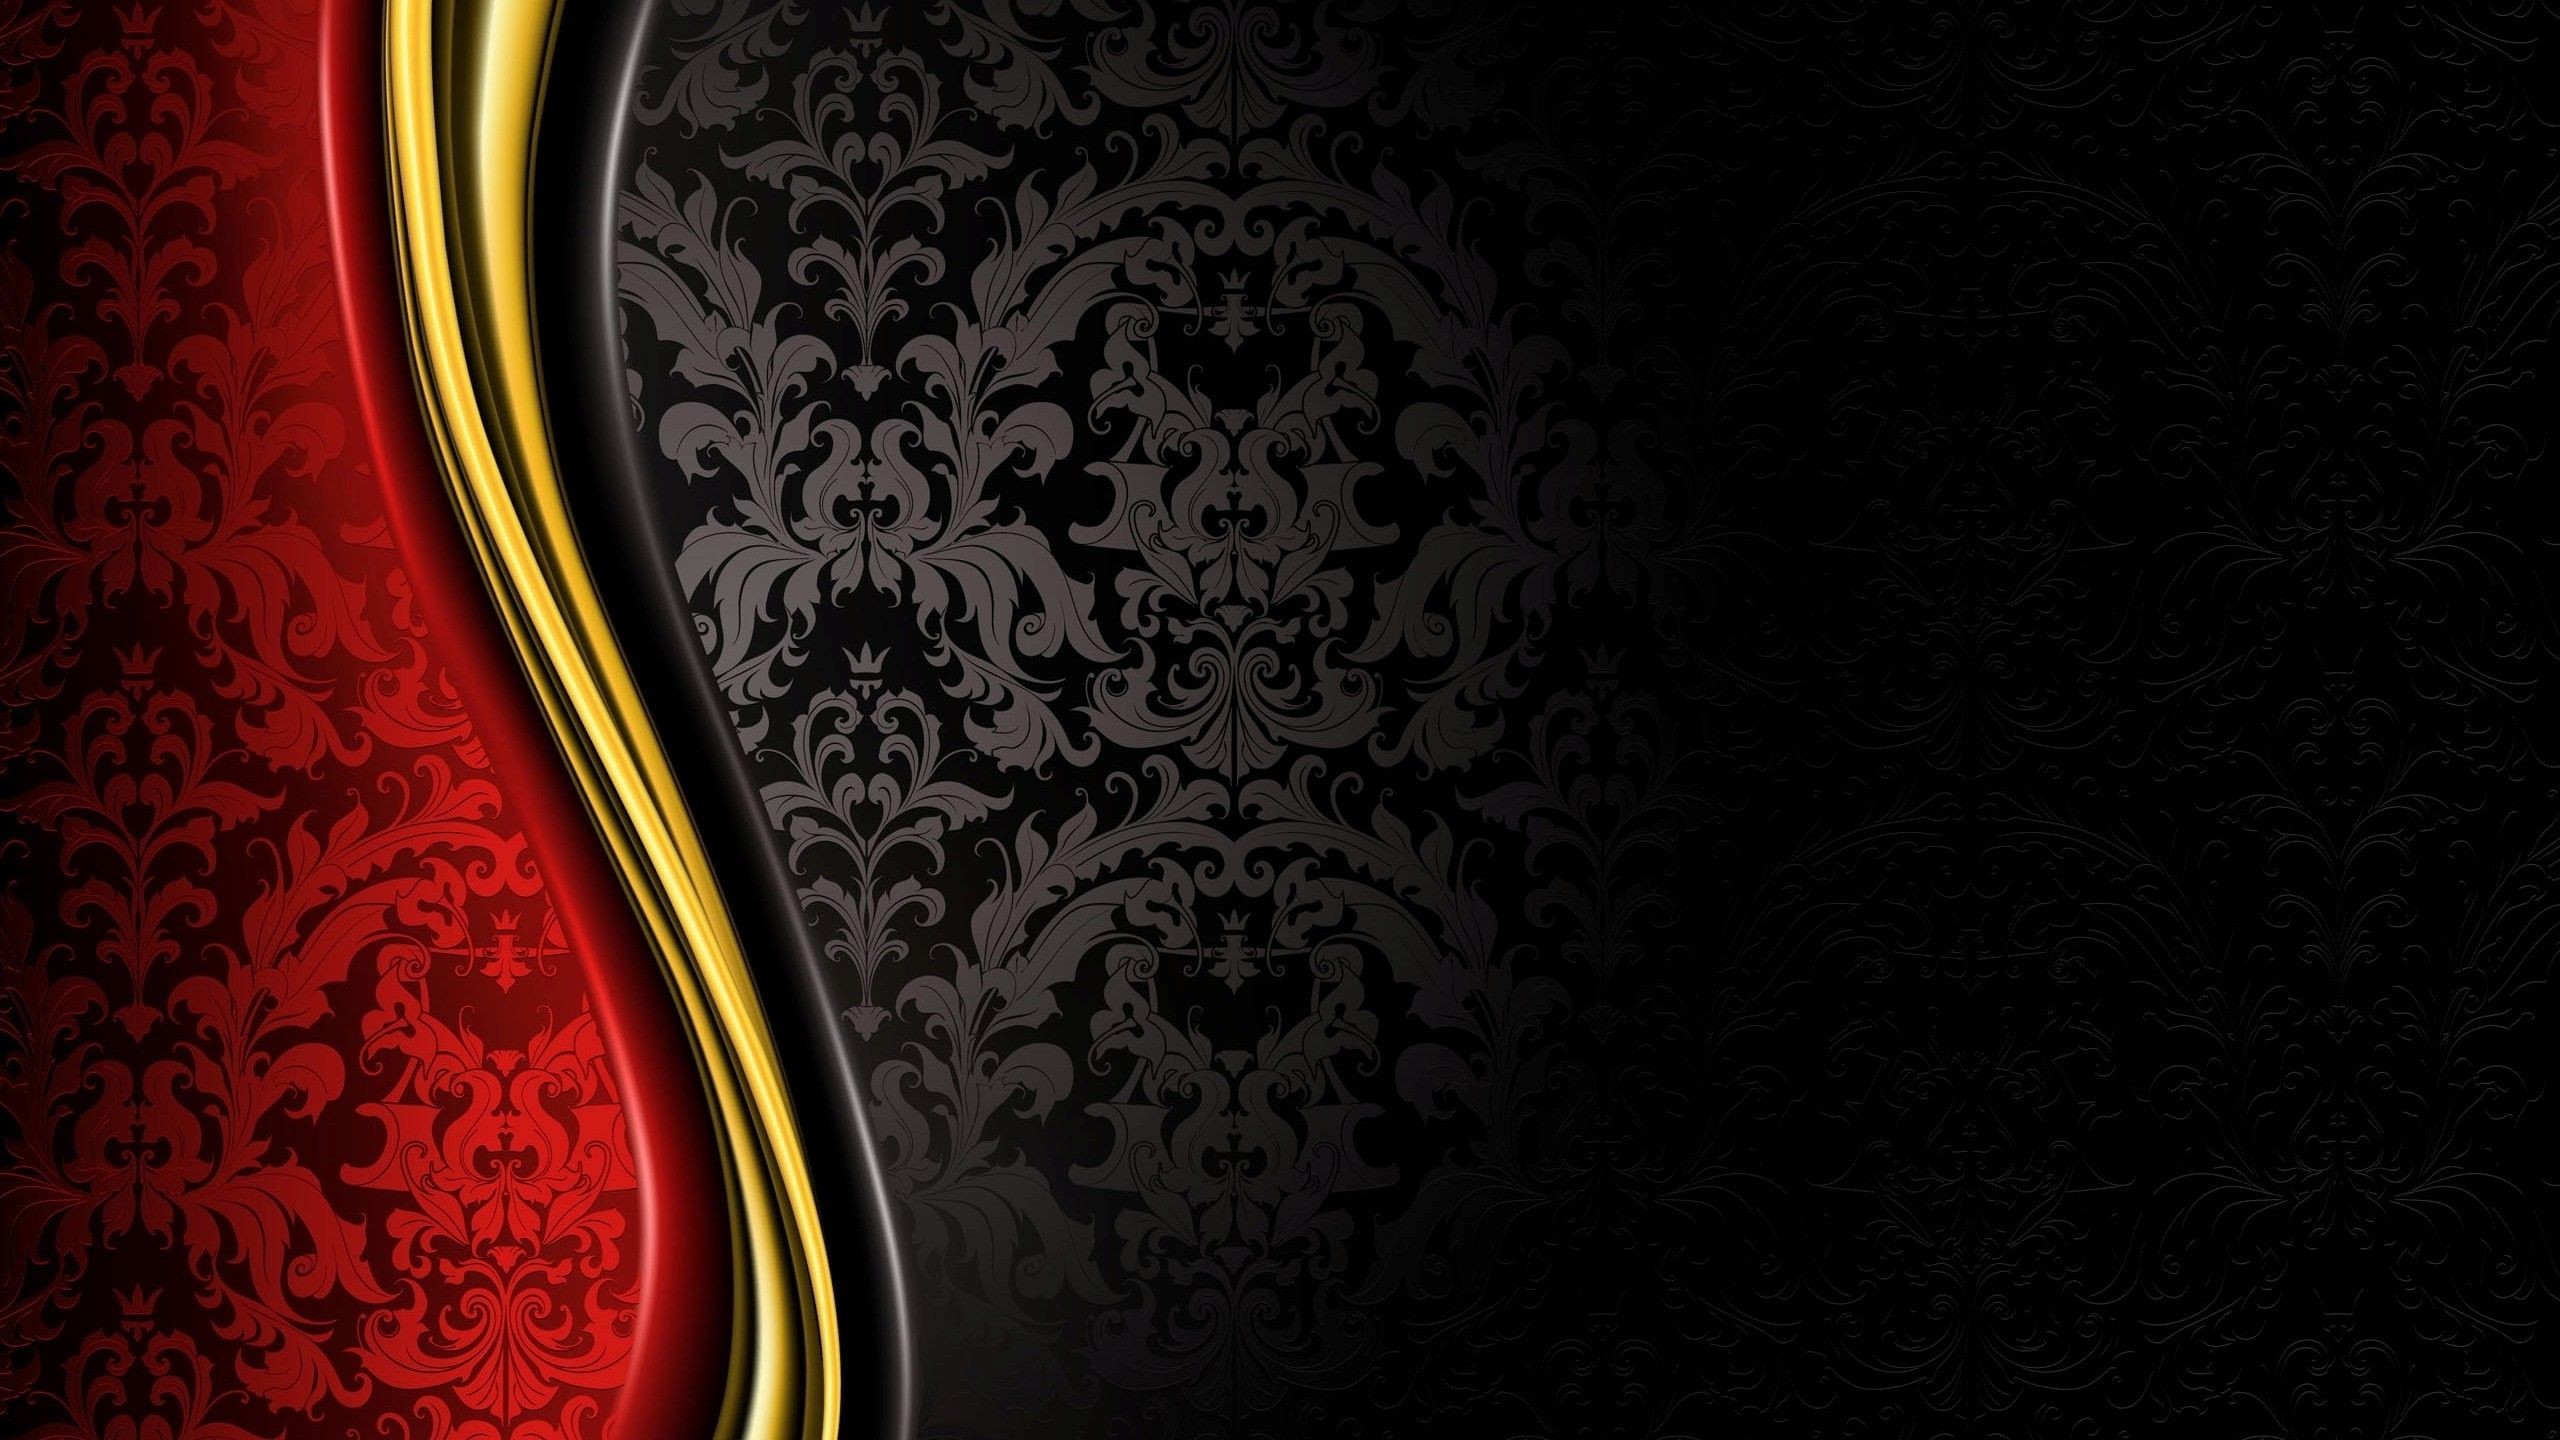 luxury, Royal, Grand, Black, Gold, Red, Abstract Wallpaper HD